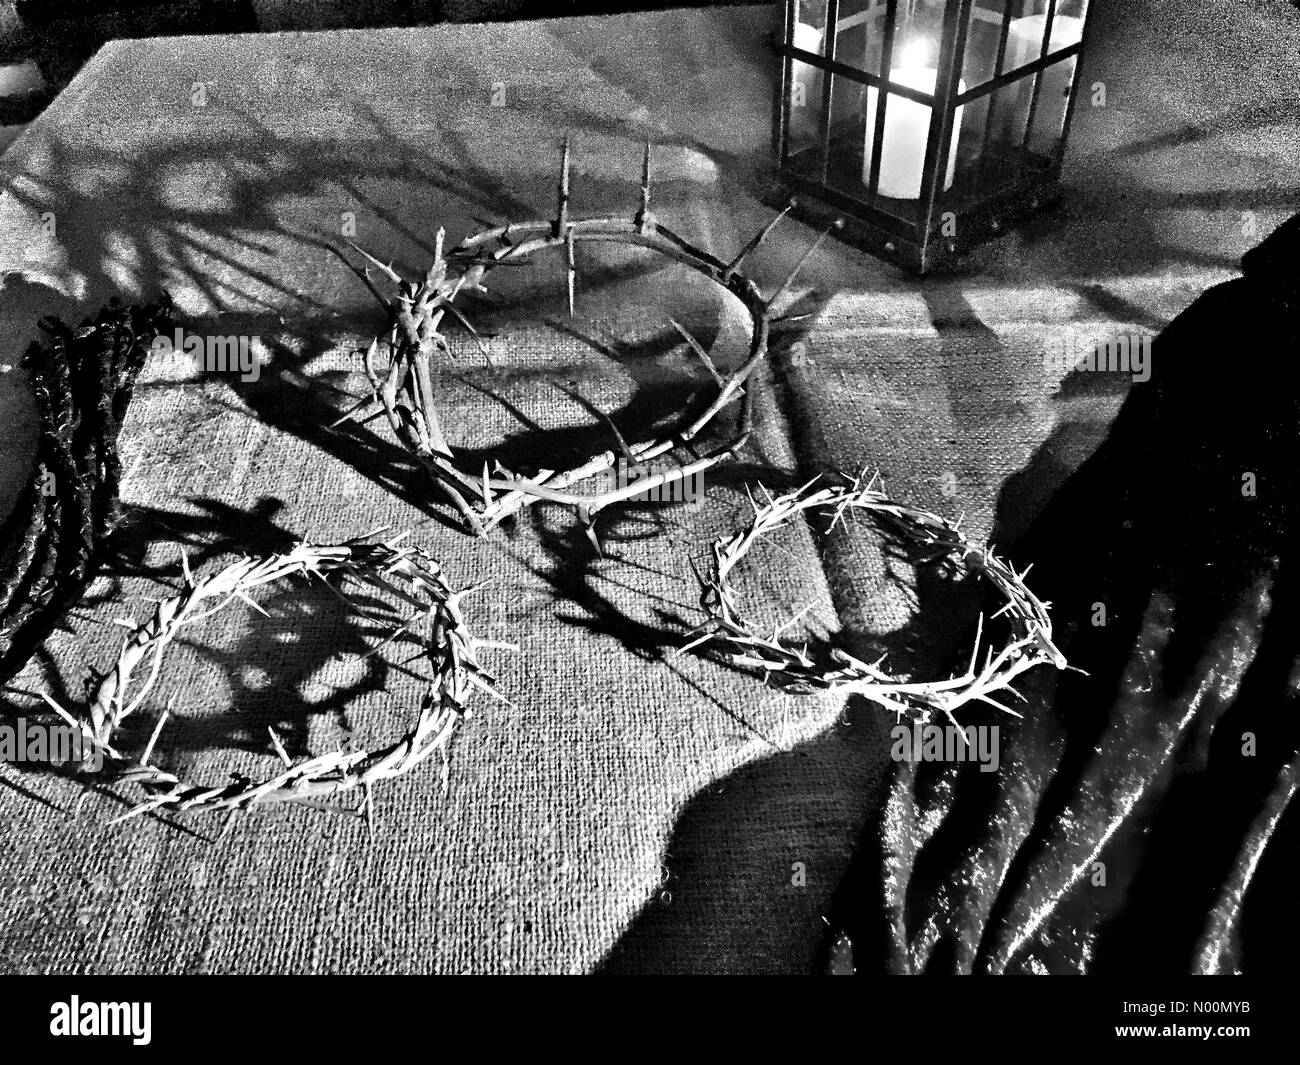 Hartland, Wisconsin, USA, 30th March 2018. Good Friday Experience,  Crown of thorns on display at The Good Friday Experience at Oakwood Church in Hartland WI, DianaJ/StockimoNews/Alamy Credit: Diana J./StockimoNews/Alamy Live News Stock Photo